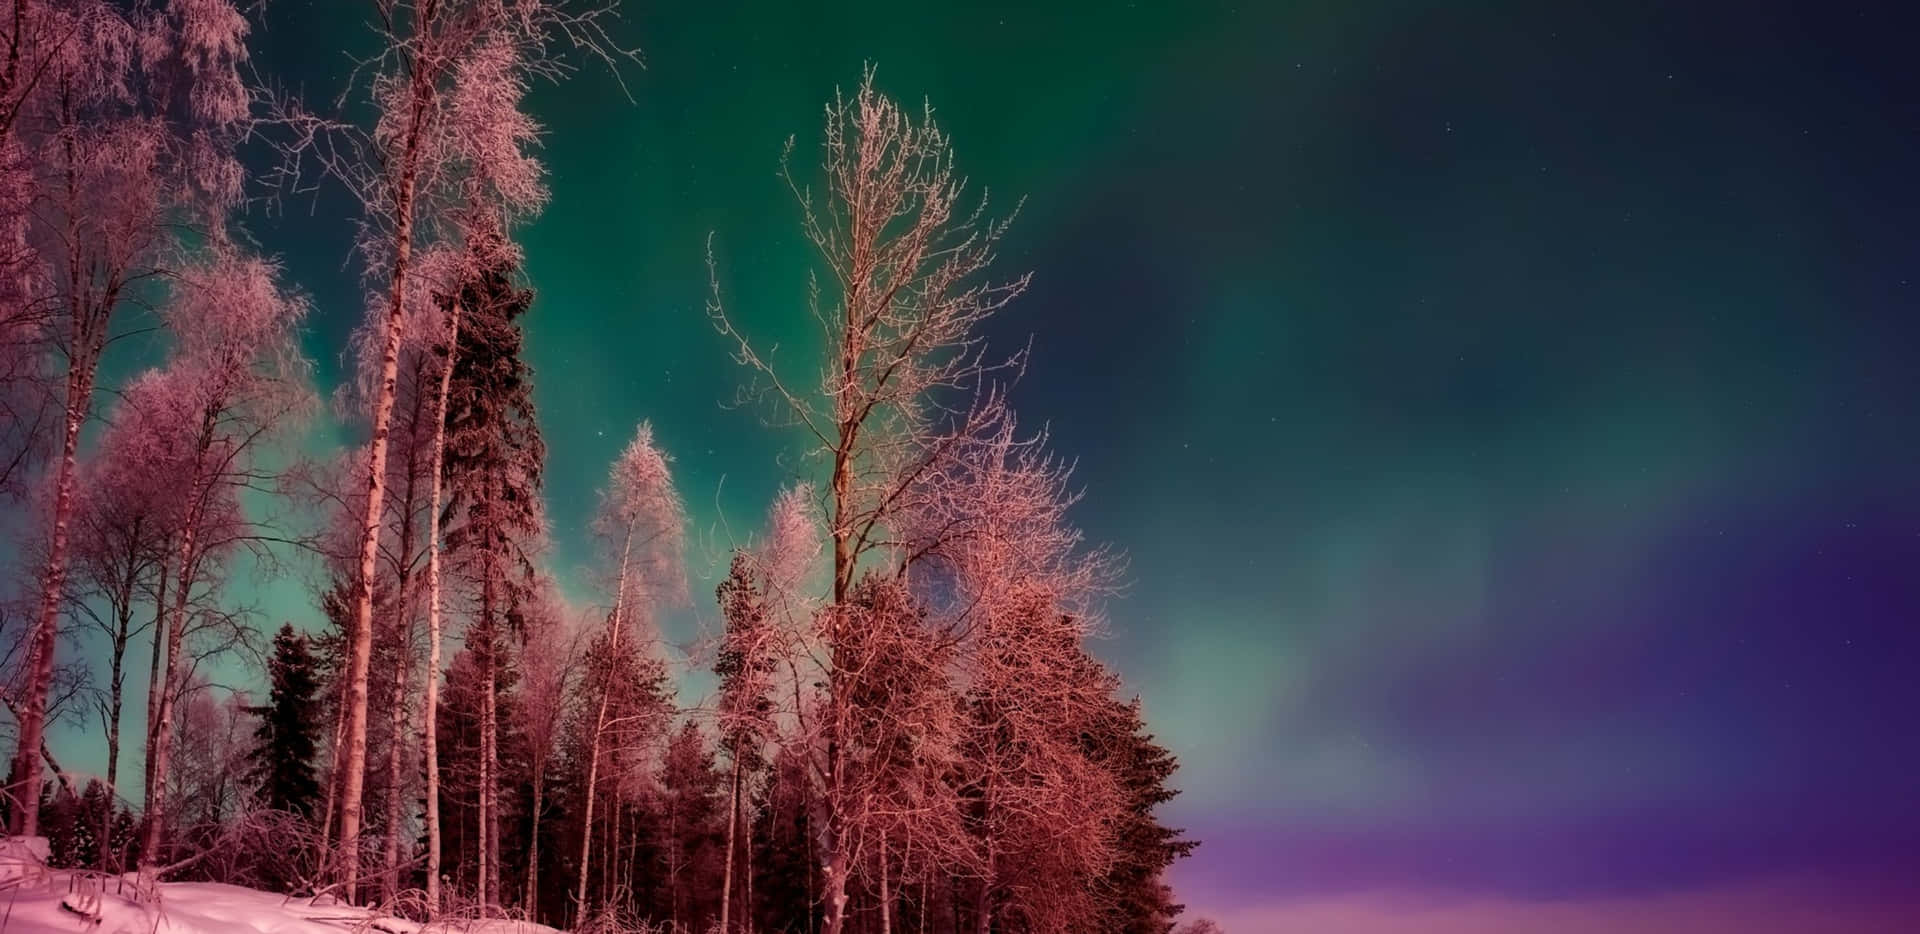 The Aurora Borealis Is Seen Over A Snowy Landscape Wallpaper